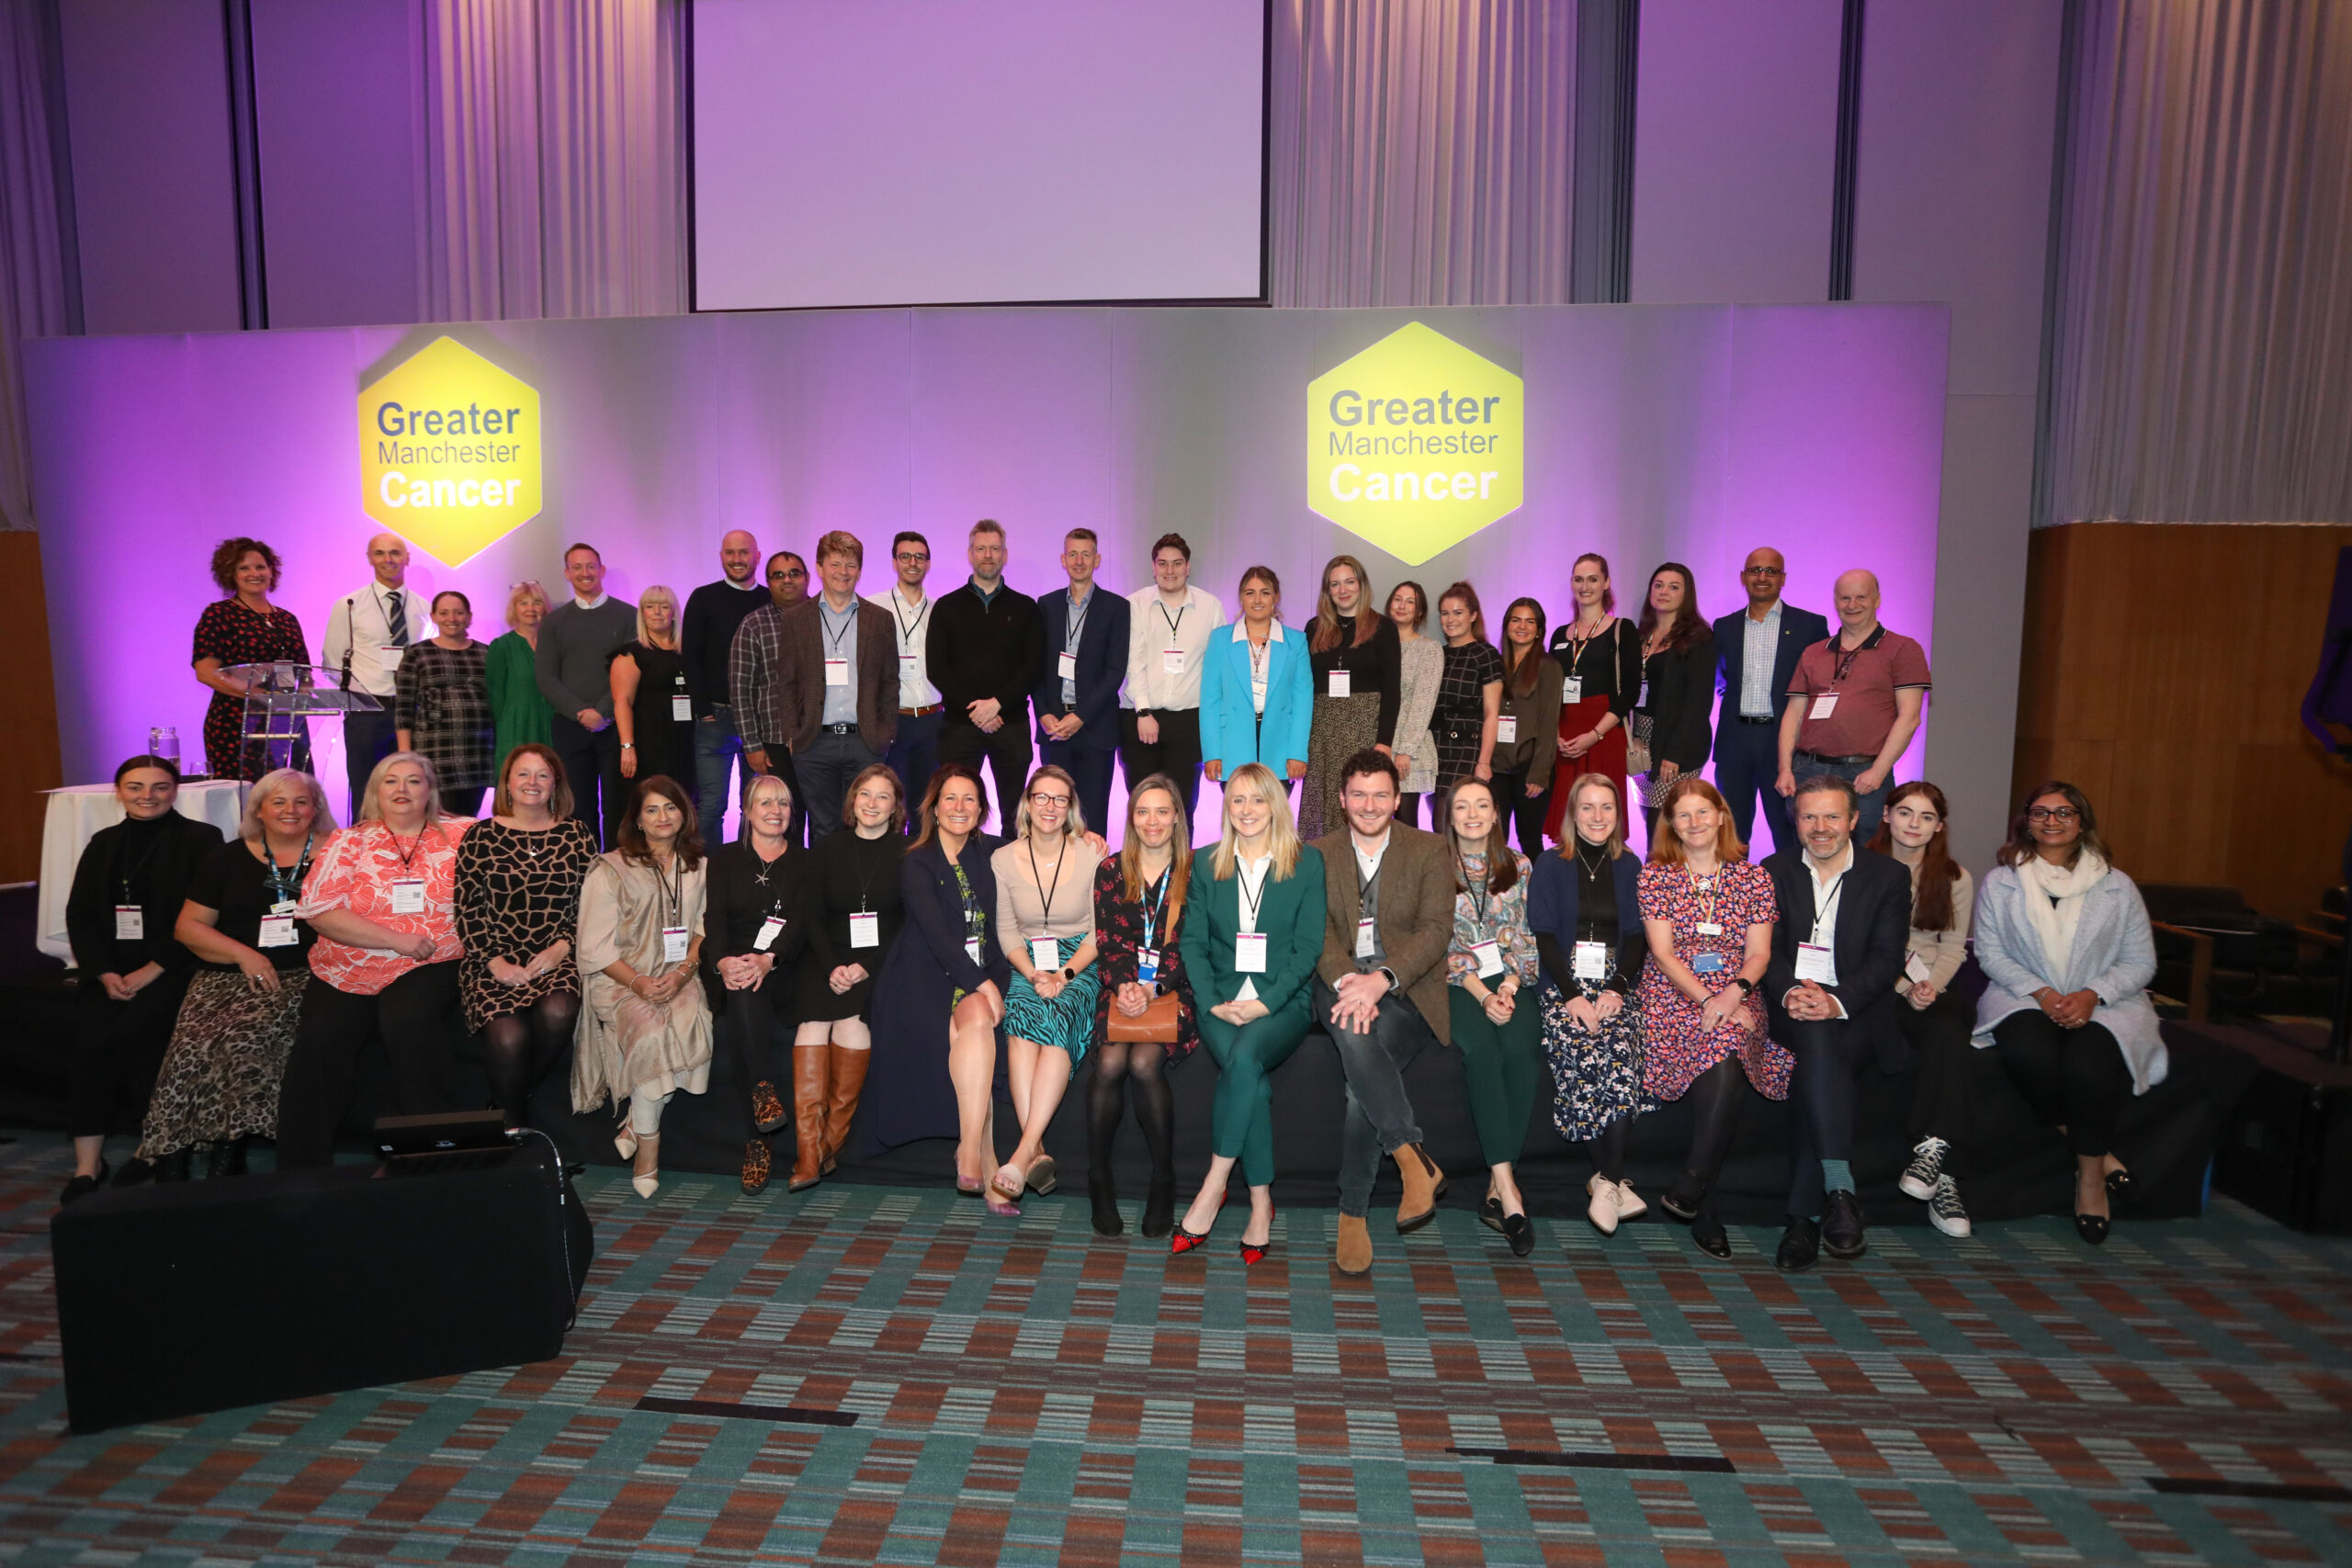 A group of around 40 men and women stand and sit on the stage at the Greater Manchester Cancer conference. There are two green hexagon logos with the words 'Greater Manchester Cancer' behind them.